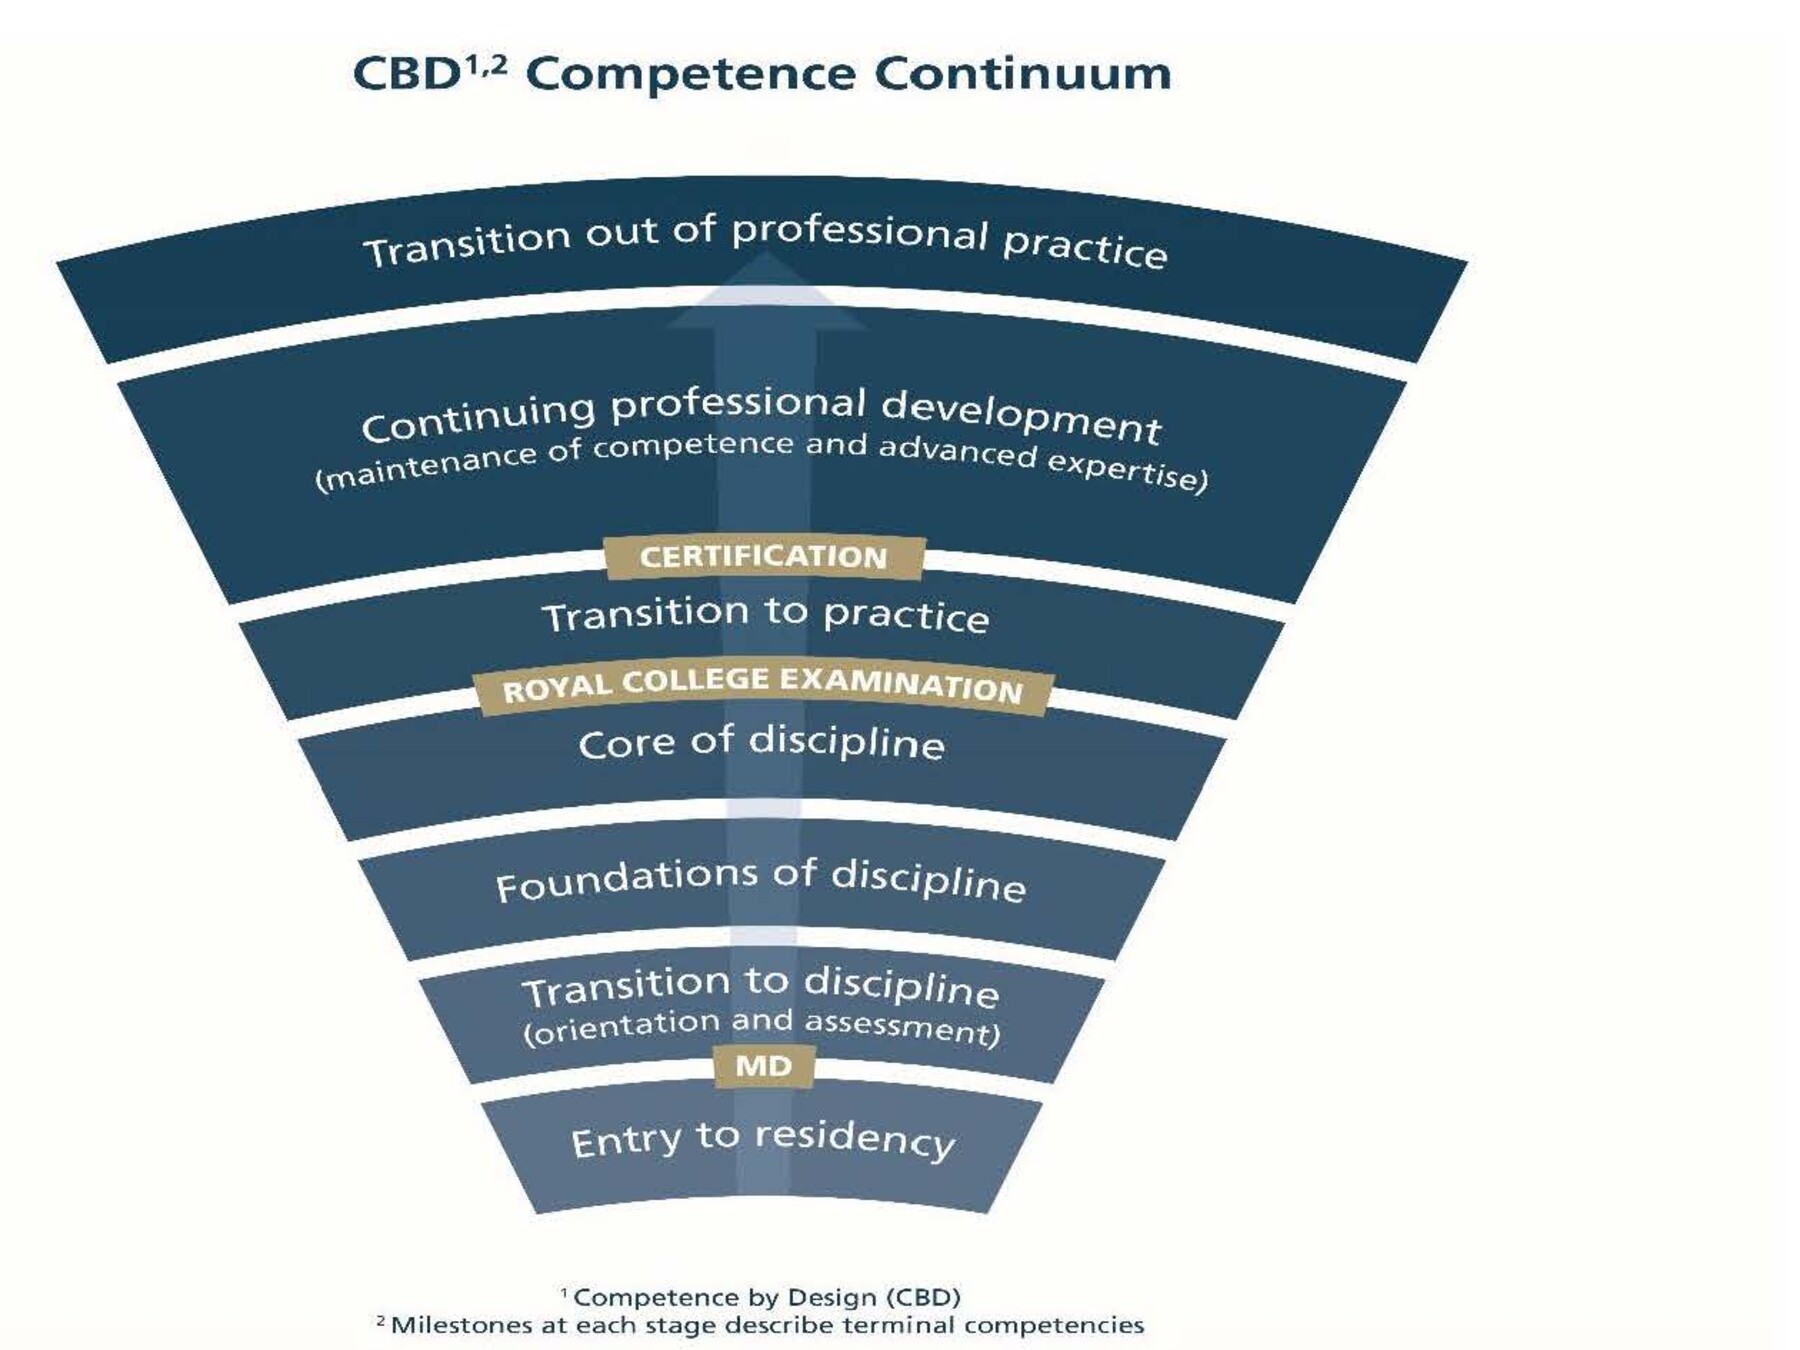 Royal College Competency Continuum